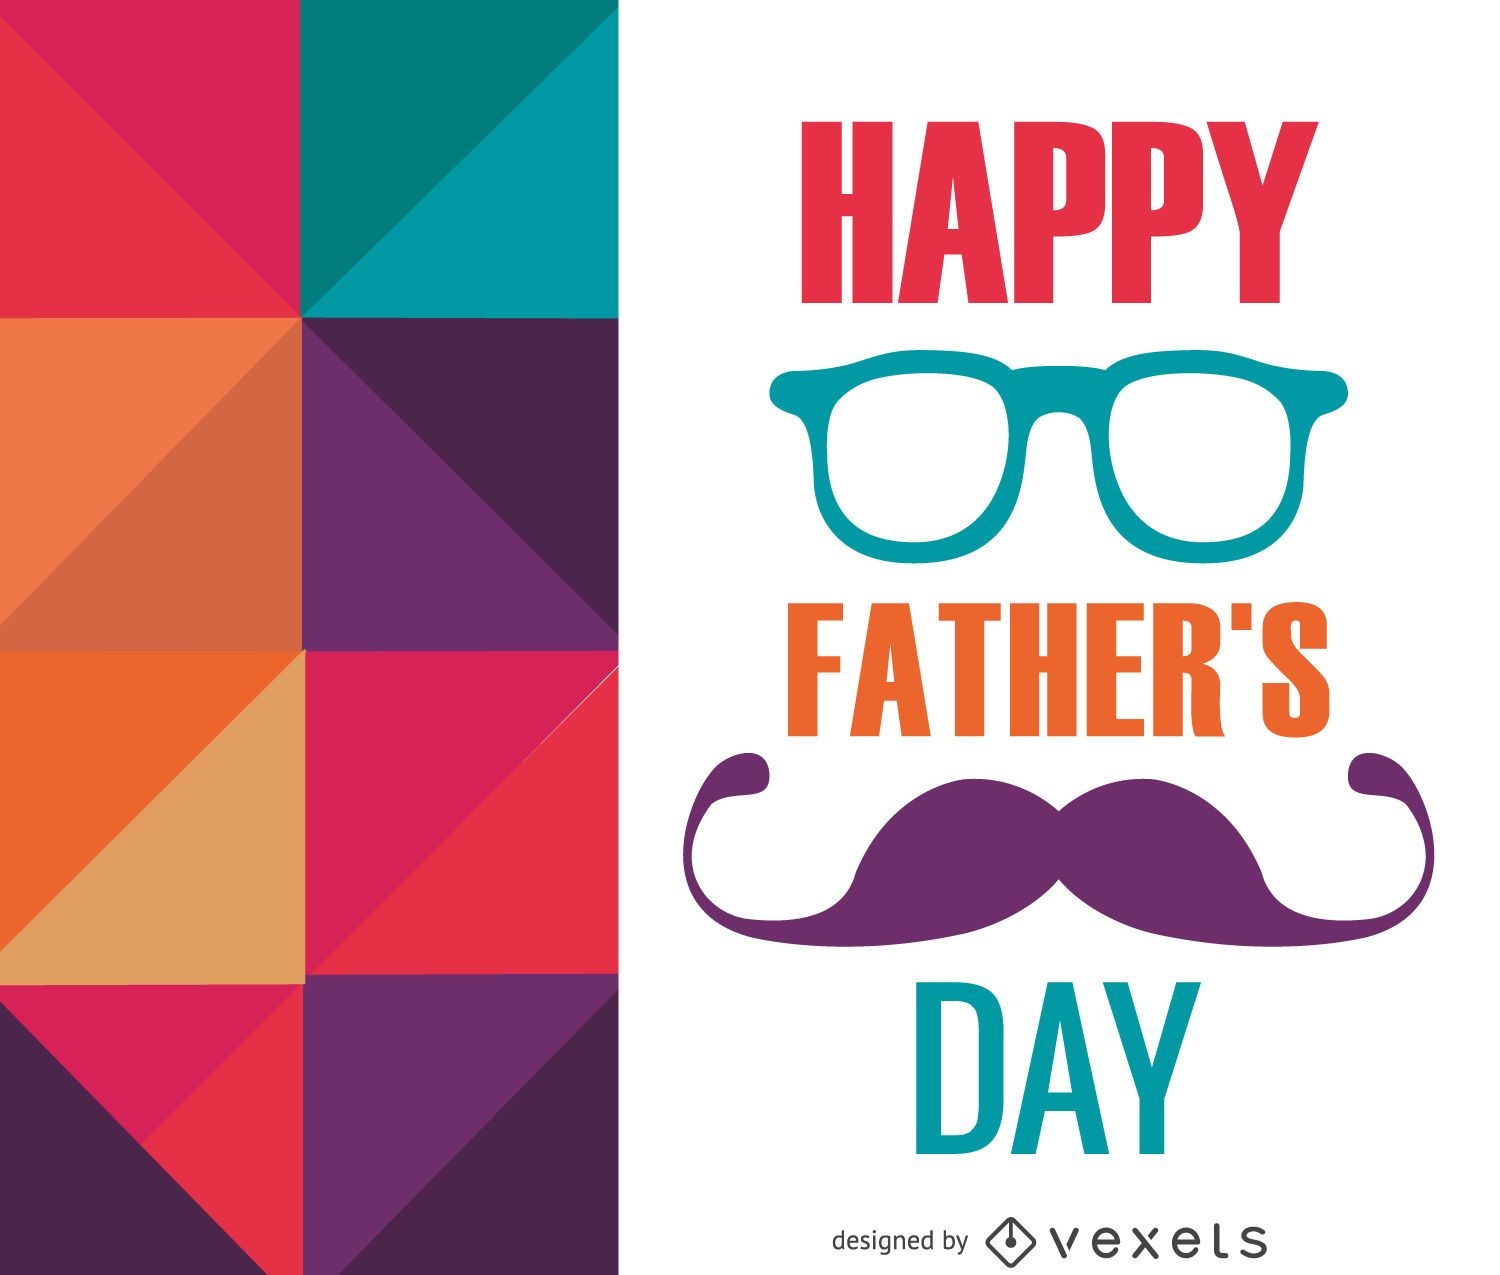 Download Polygonal Father's Day card - Vector download